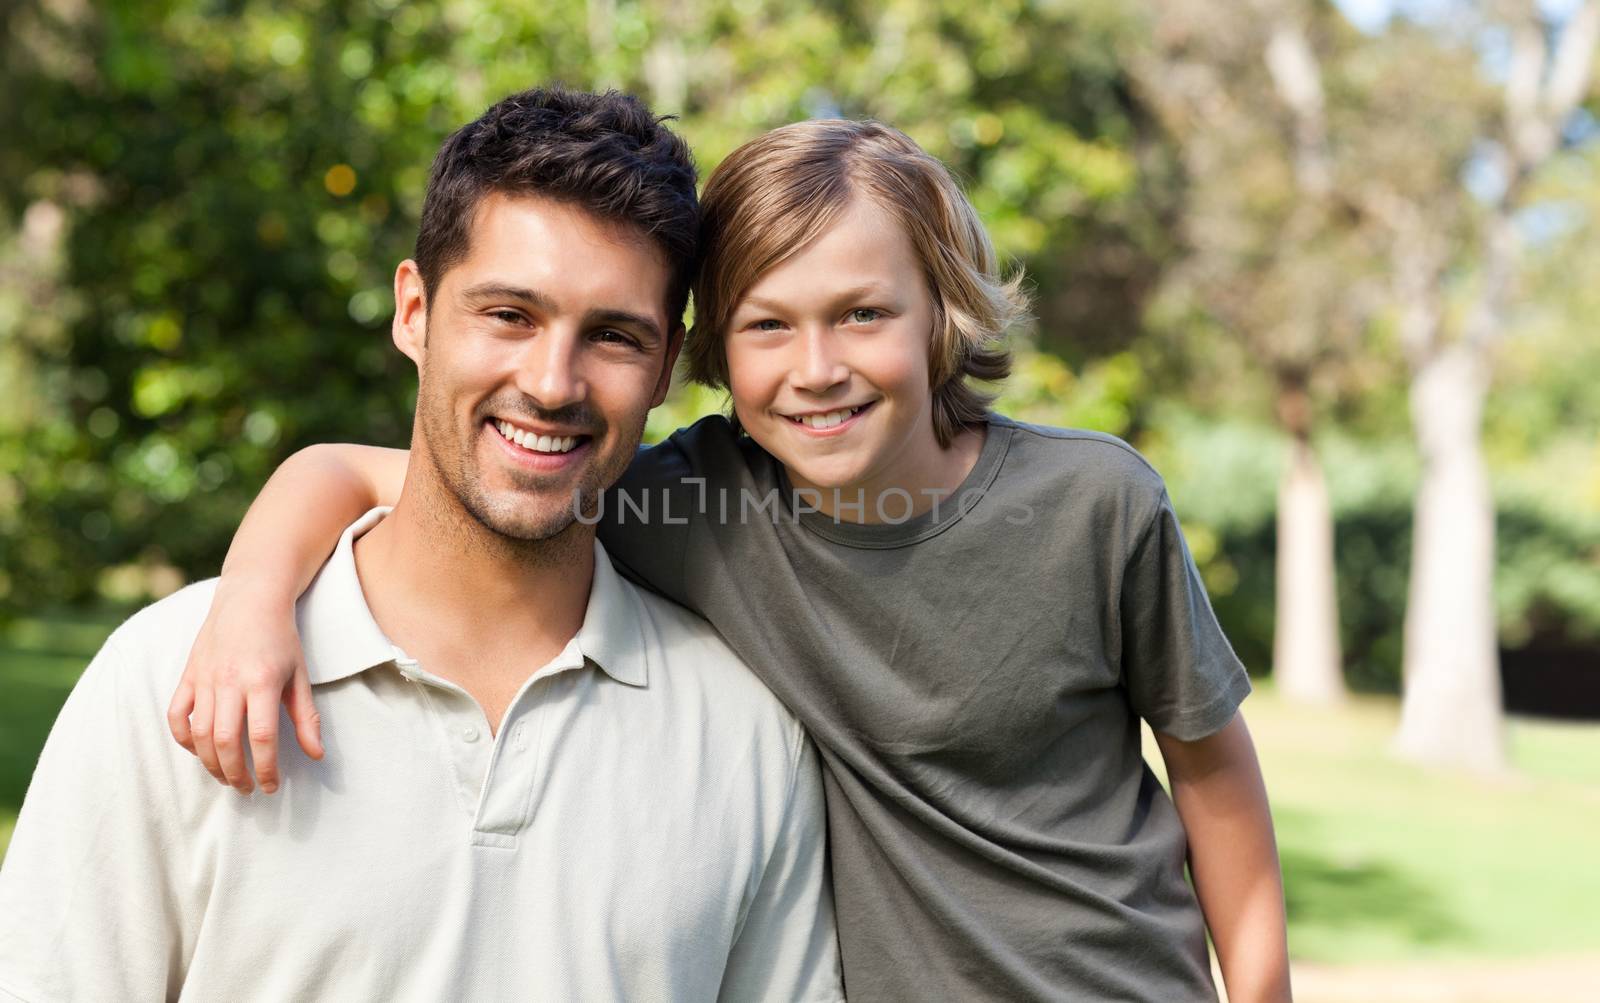 Son and his father in the park by Wavebreakmedia